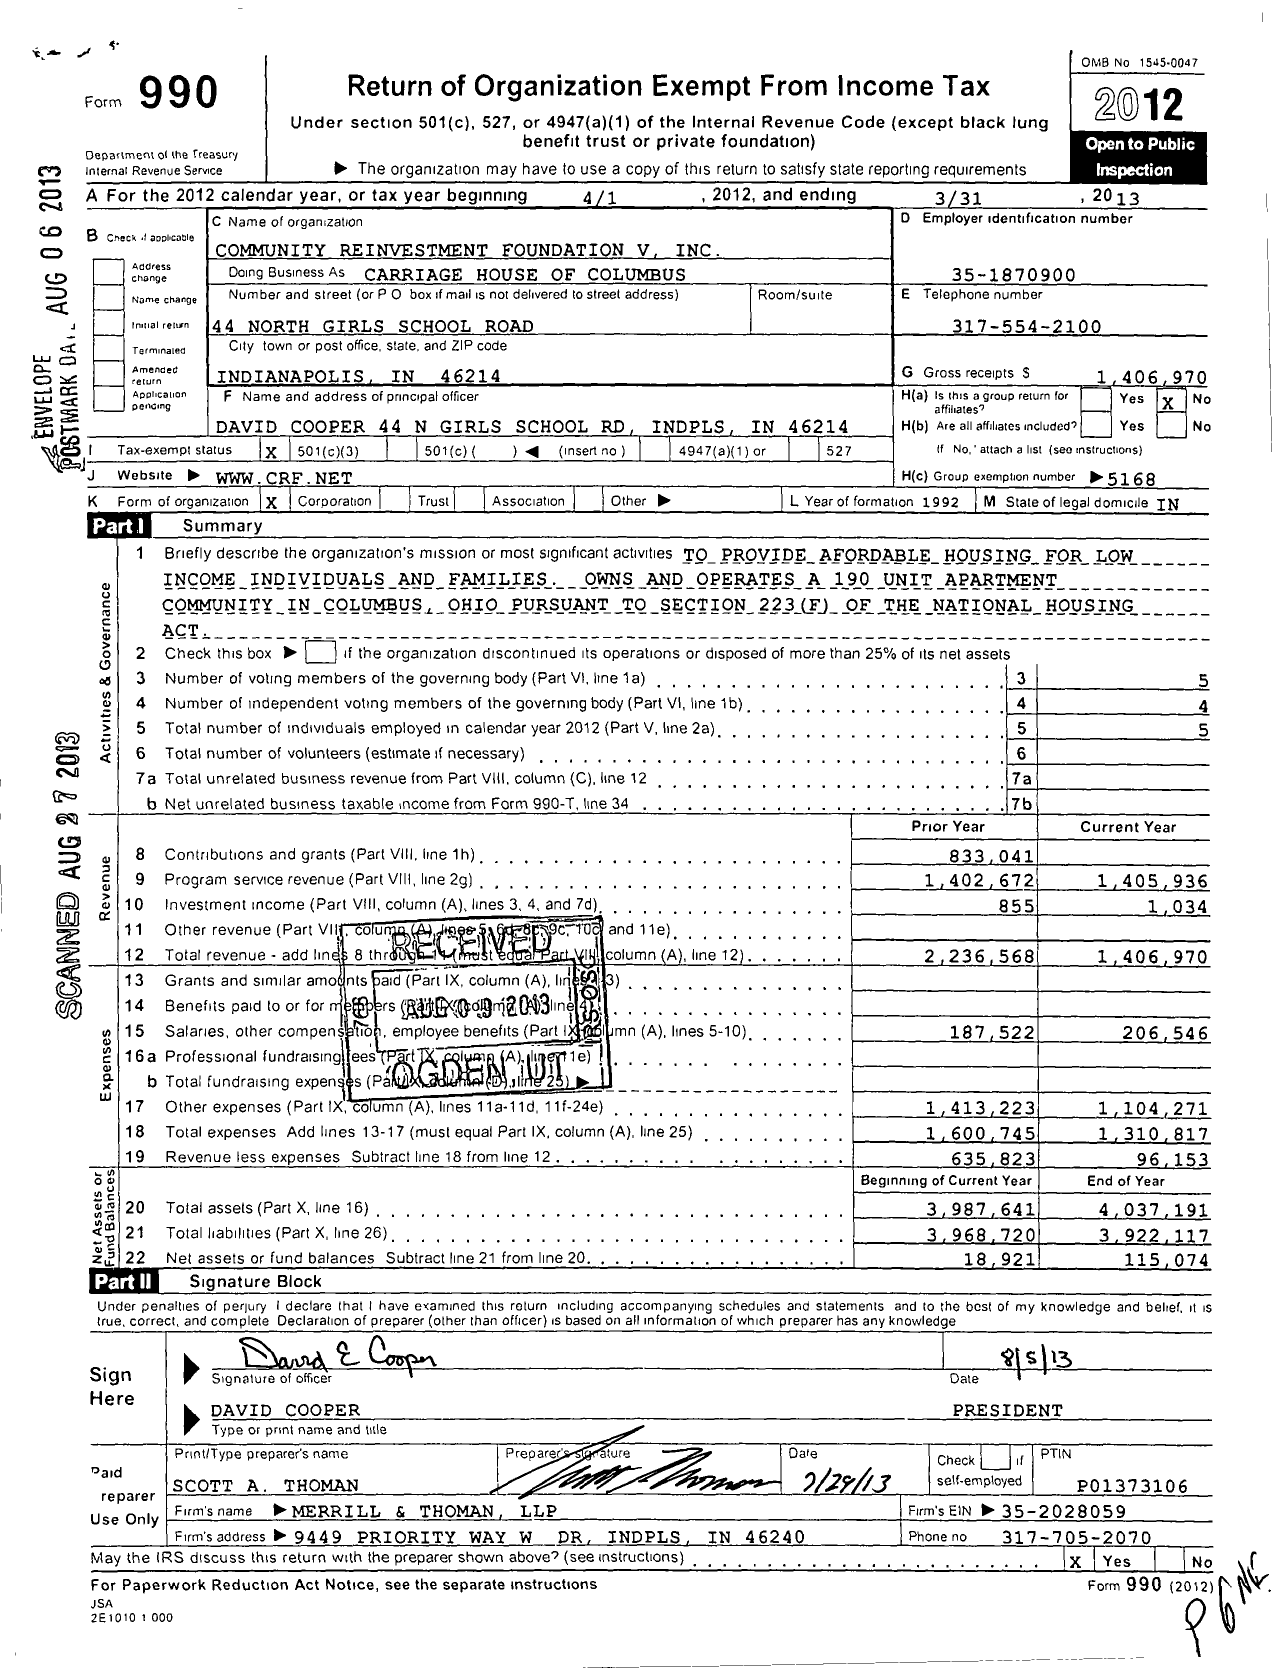 Image of first page of 2012 Form 990 for Community Reinvestment Foundation V